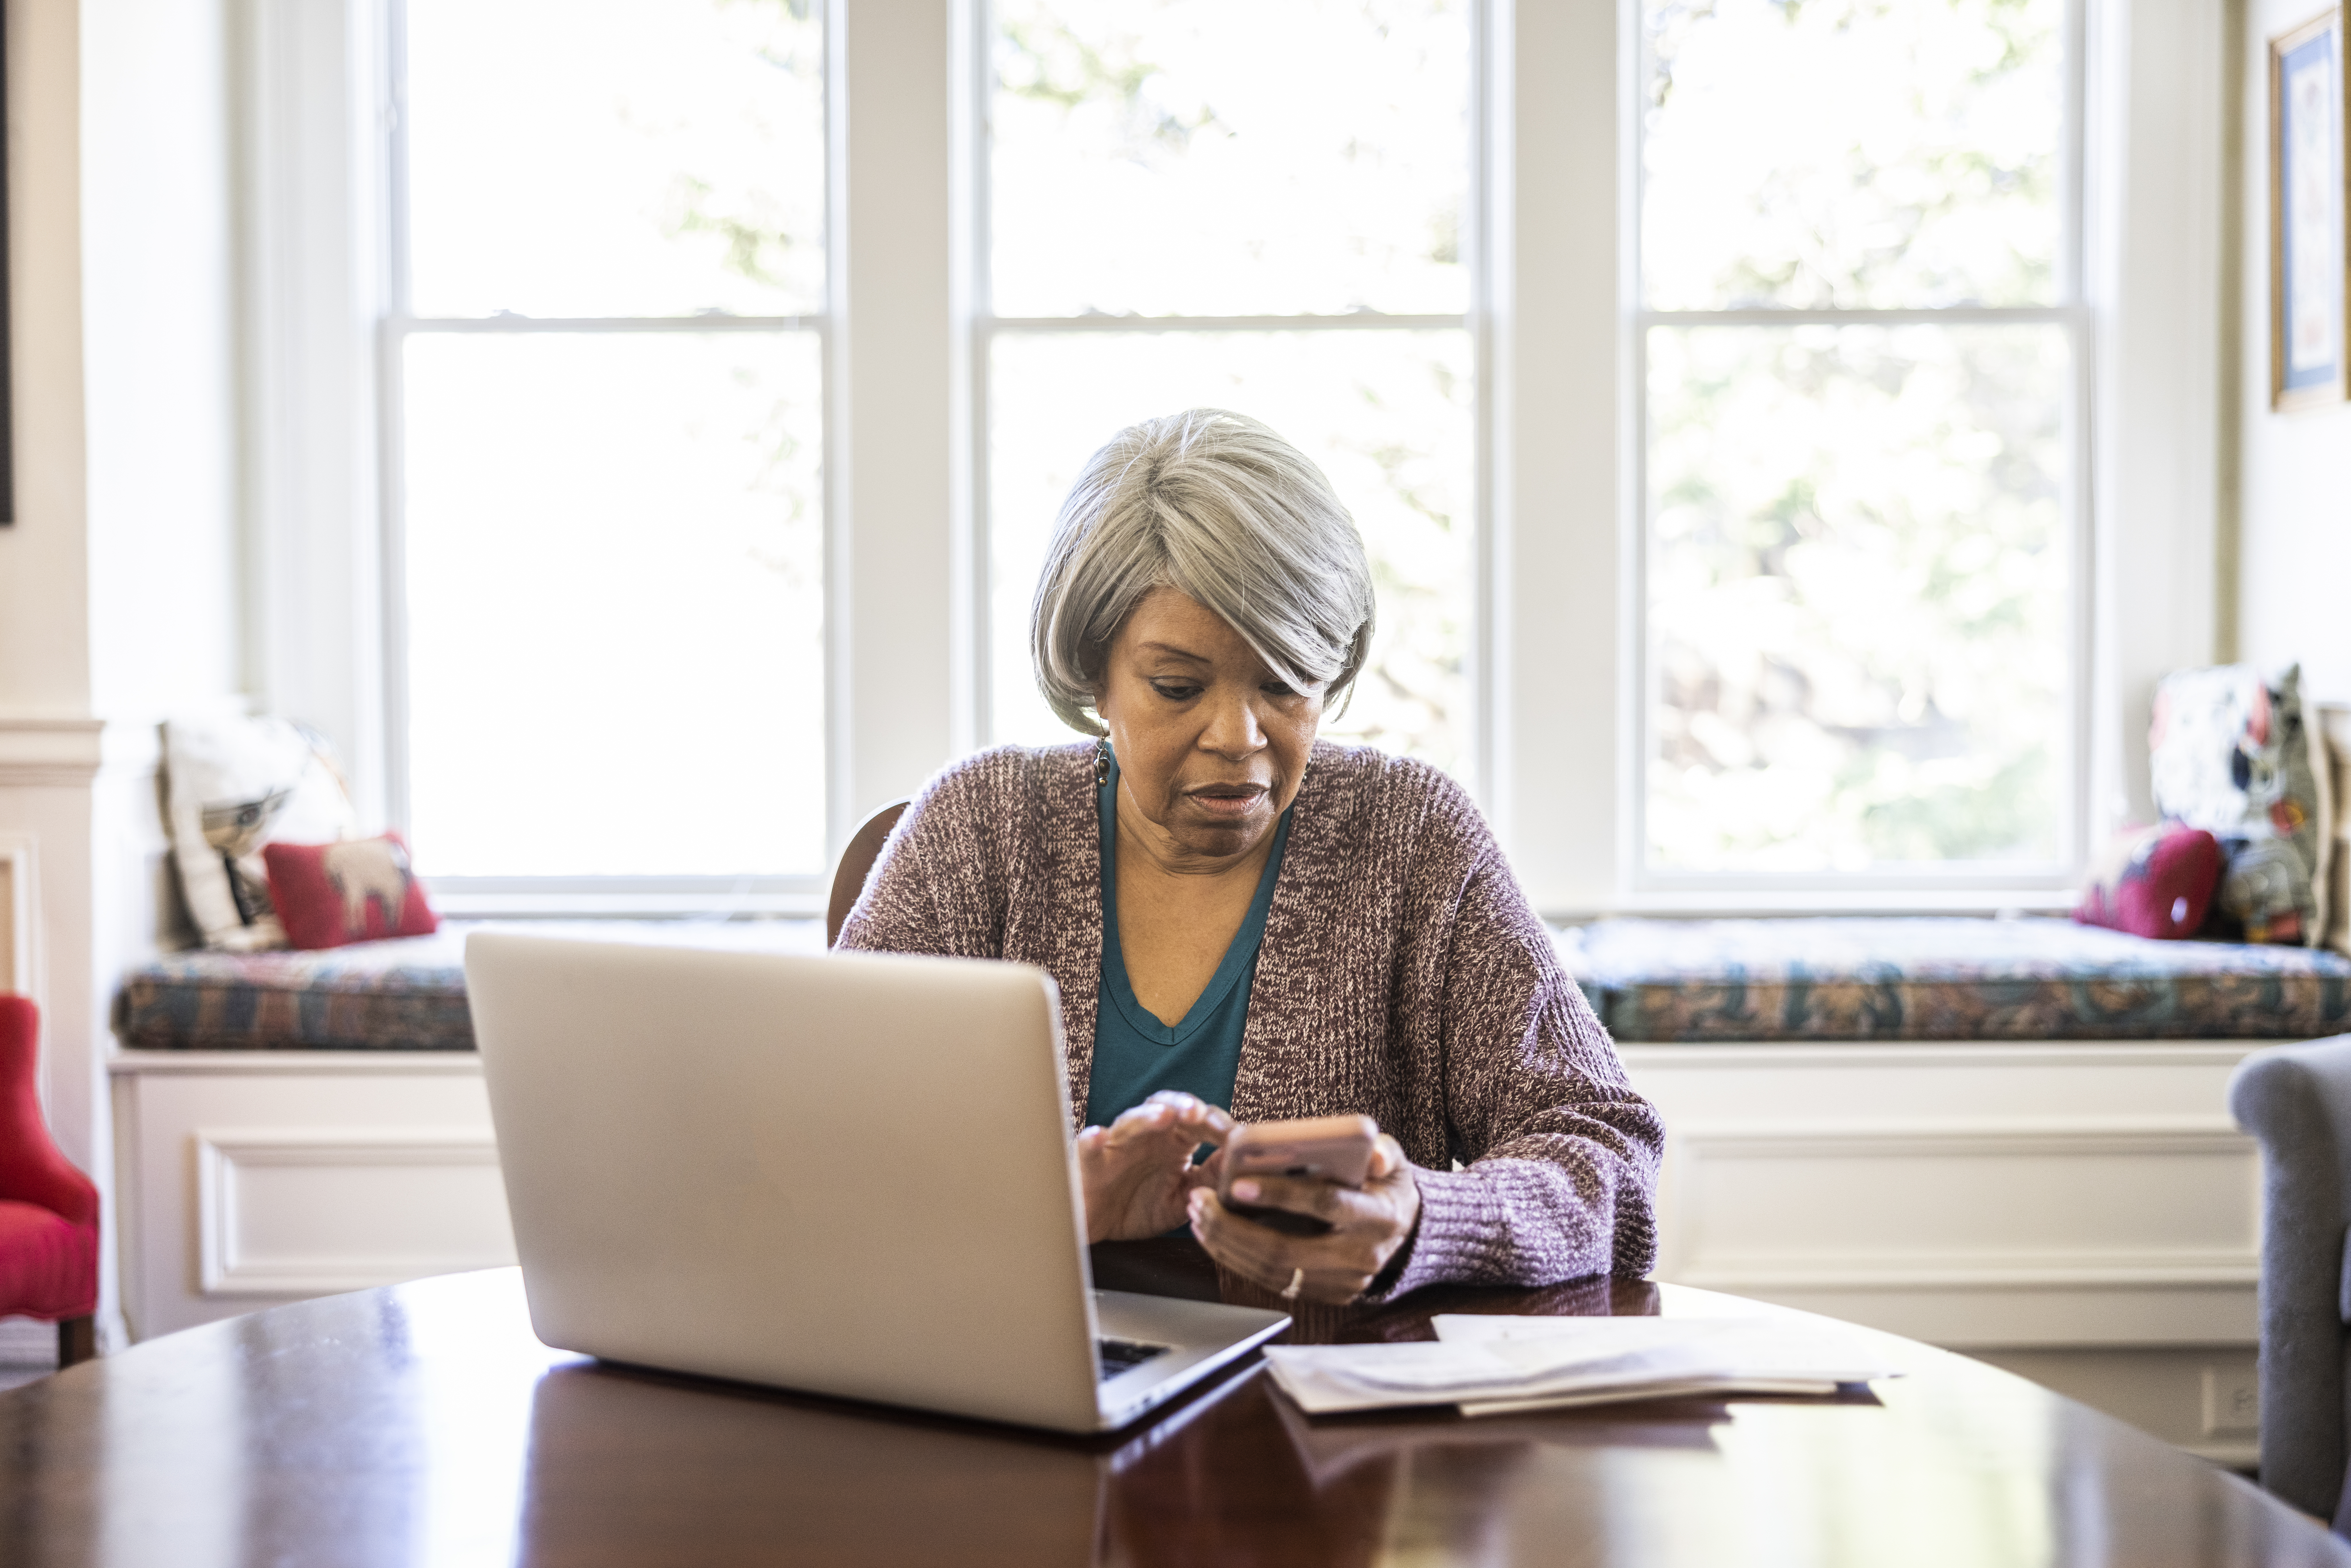 Senior woman paying bills with laptop and smartphone at home | Source: Getty Images